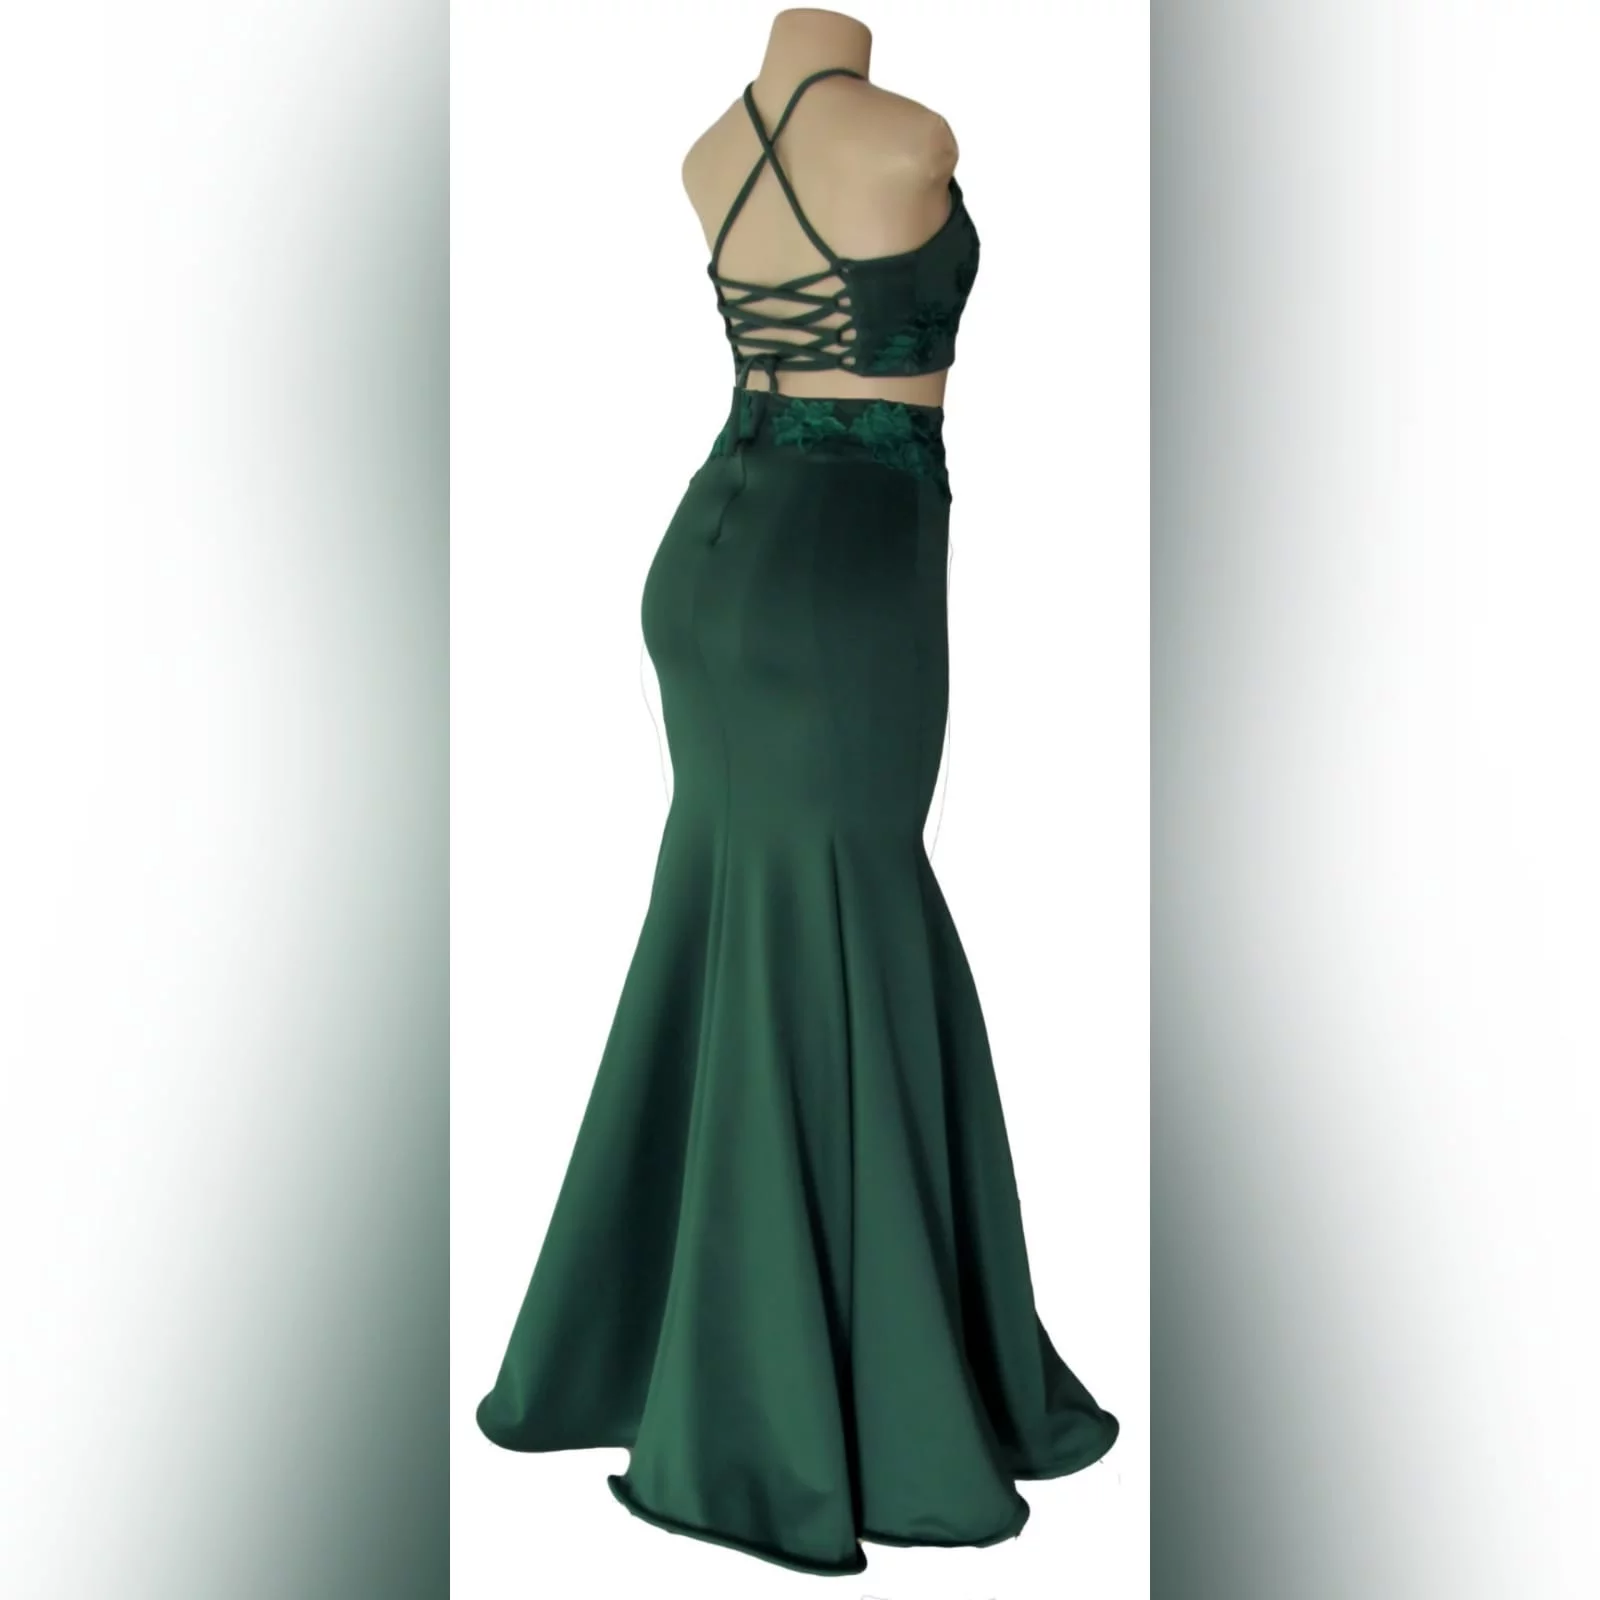 2 piece emerald green mermaid prom dress 3 2 piece emerald green mermaid prom dress. A gorgeous crop top with a lace-up open back, with a mermaid skirt. Lace detail on skirt and top for a classic touch.